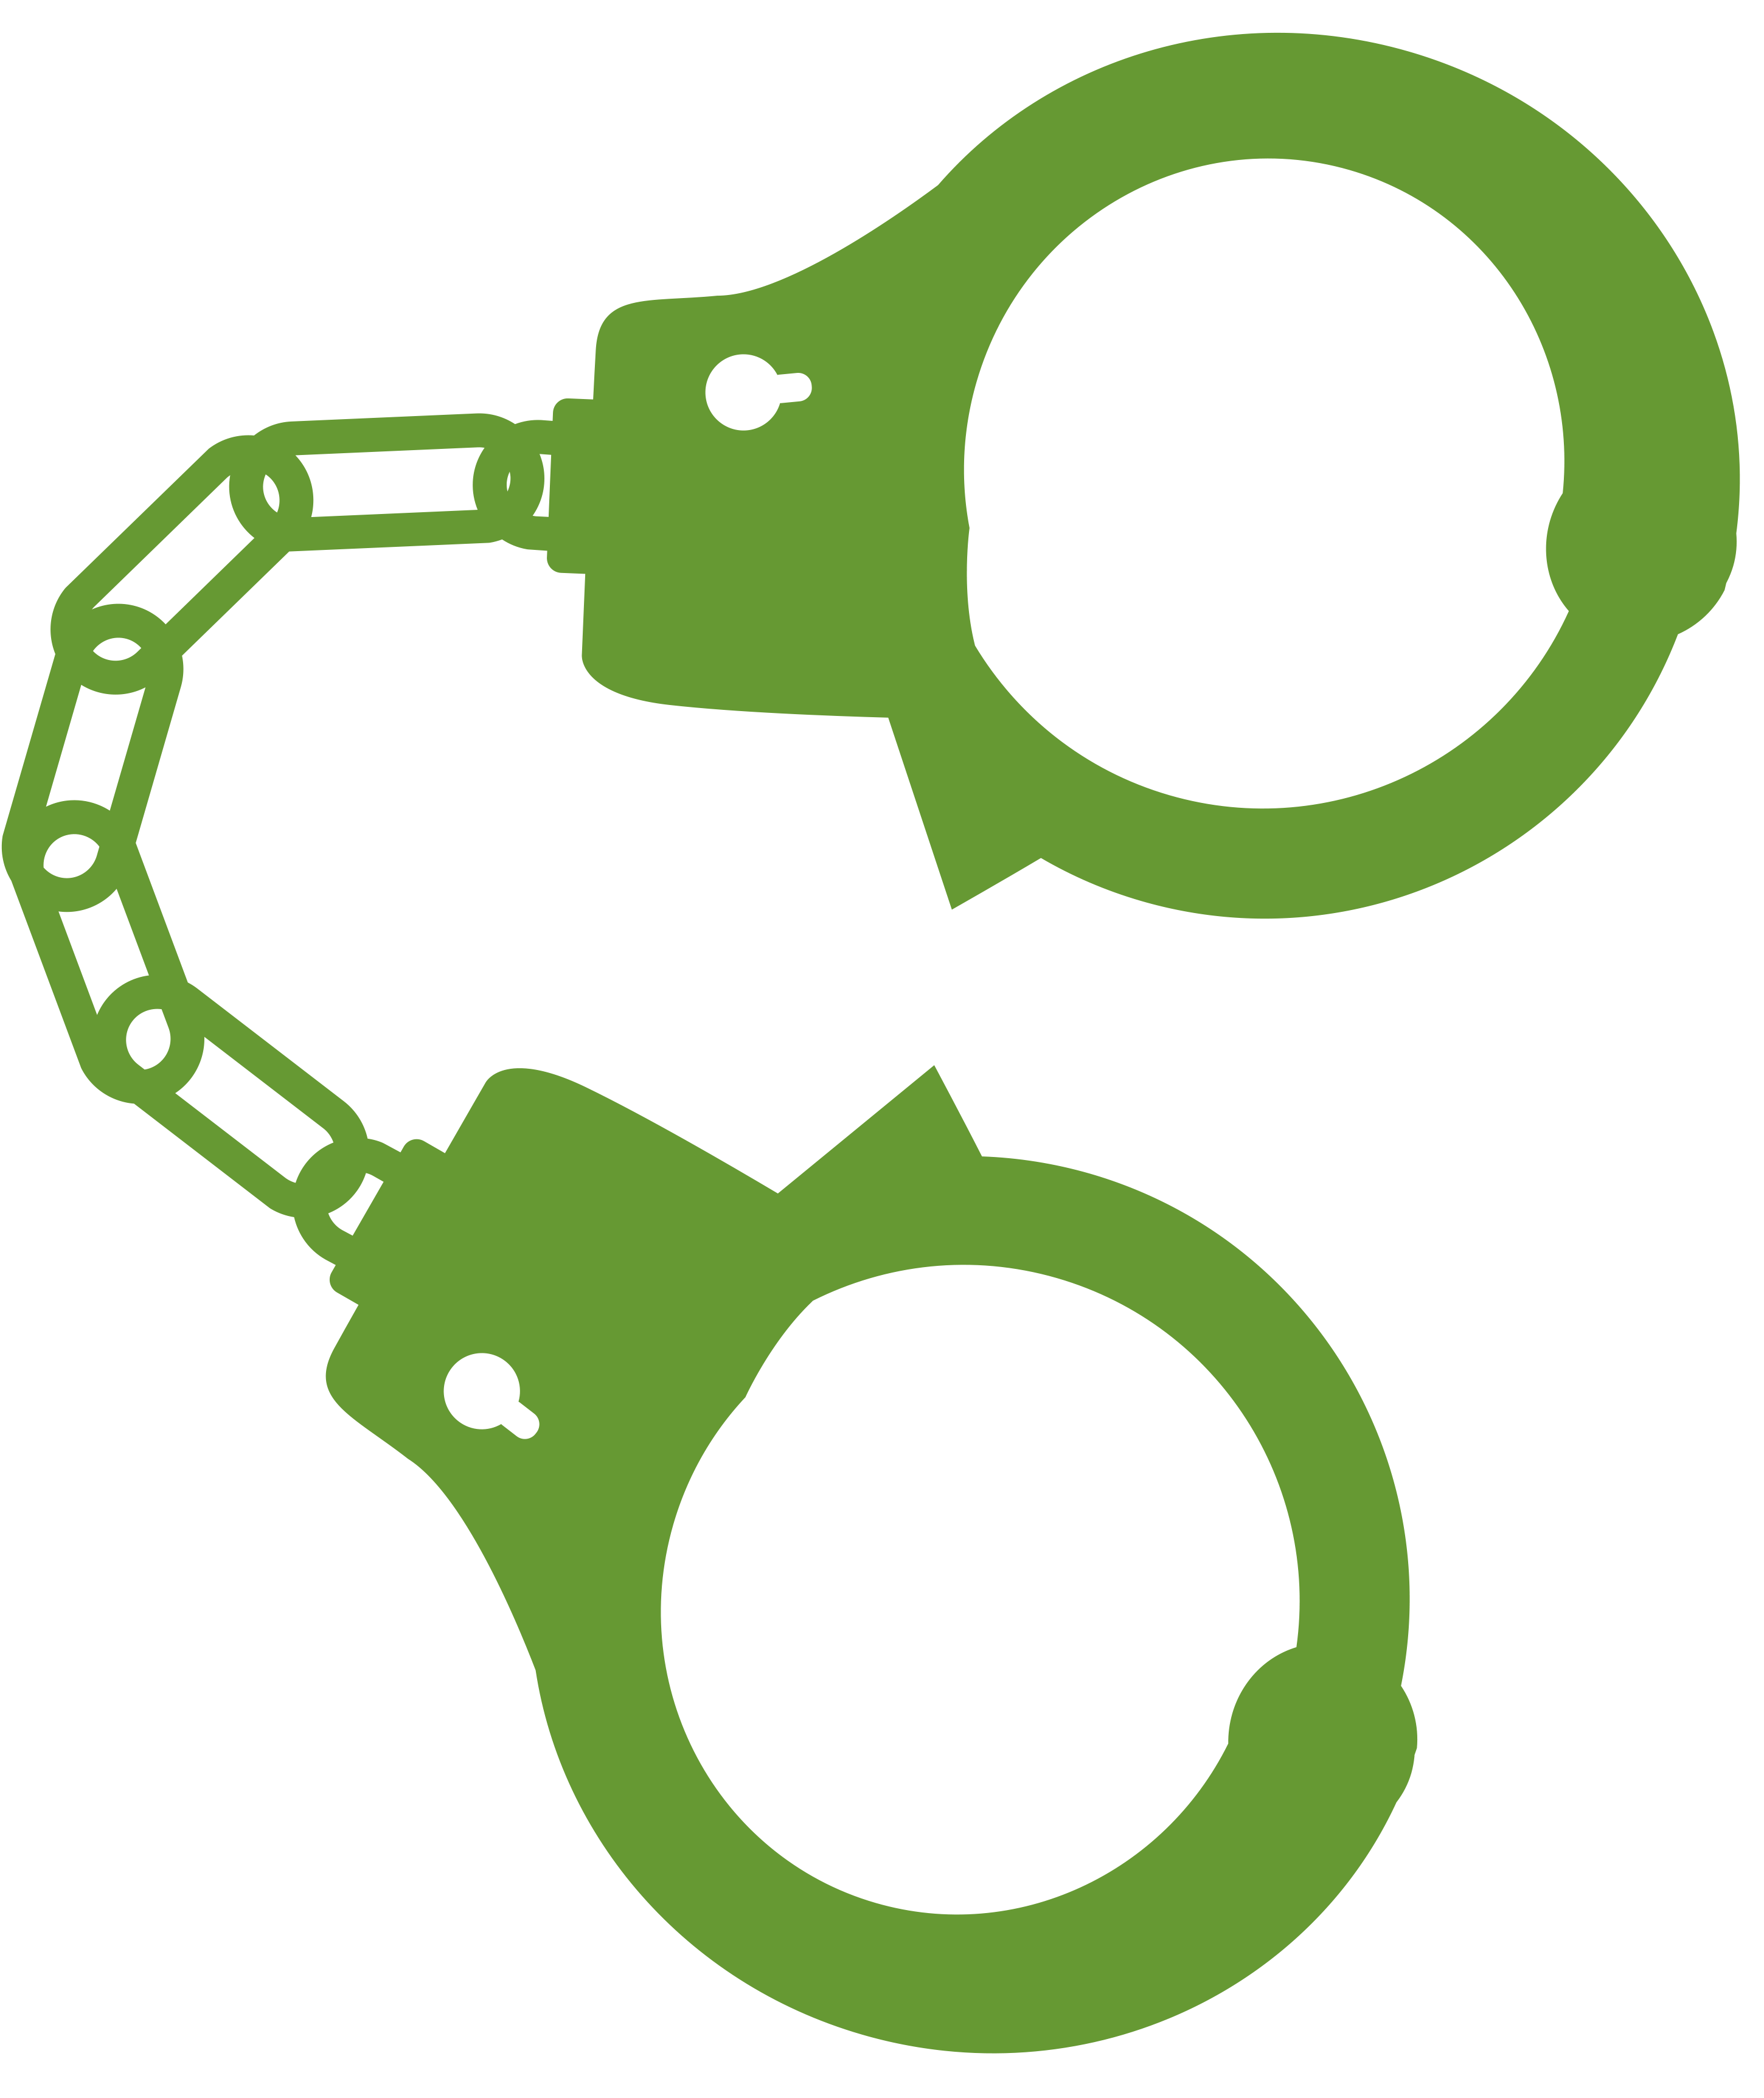 Handcuff Icon Png